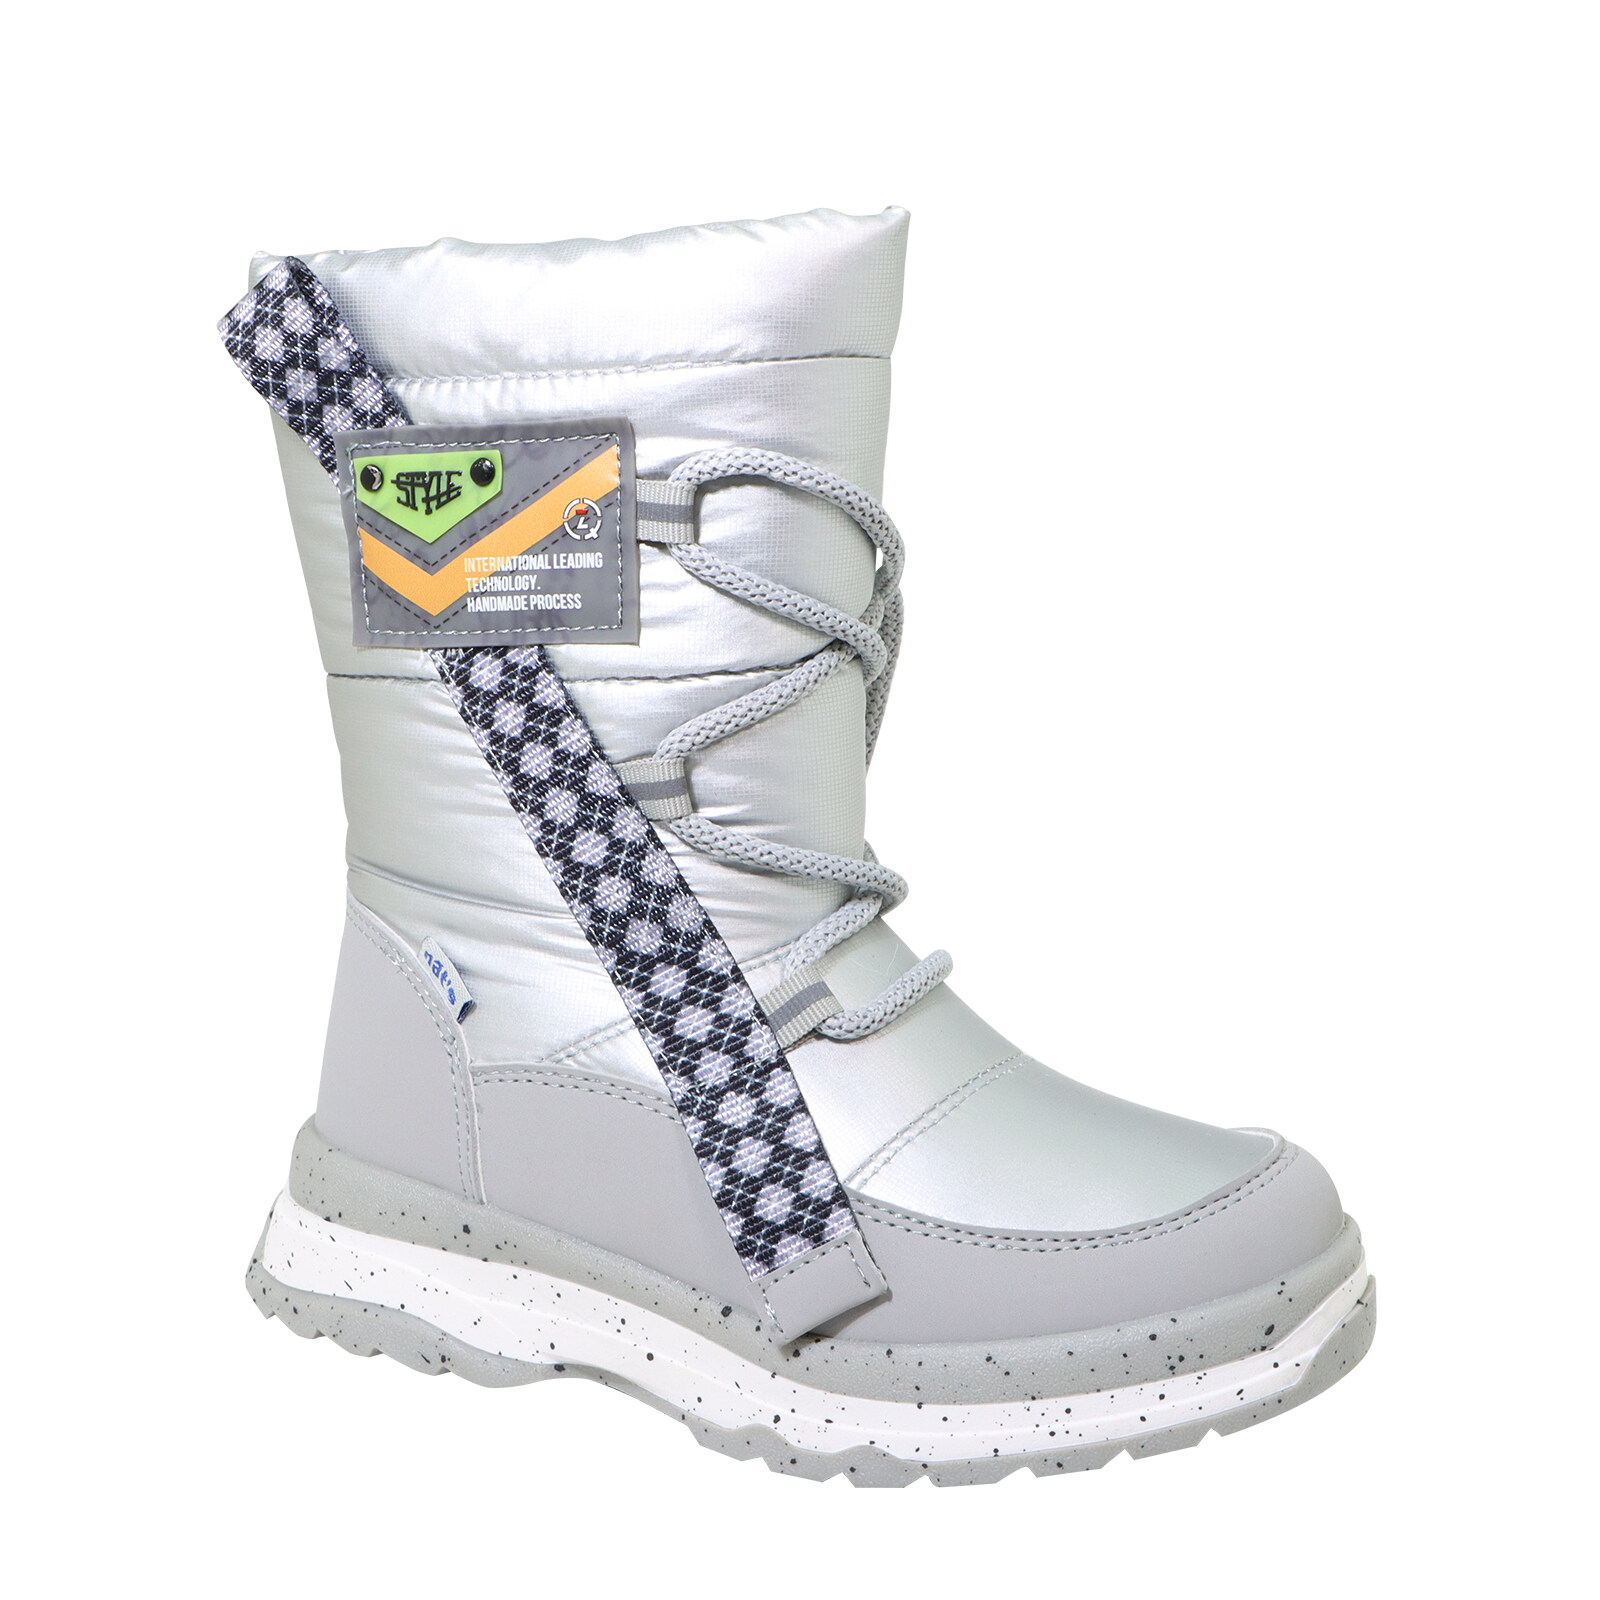 Top selling waterproof Boots for children